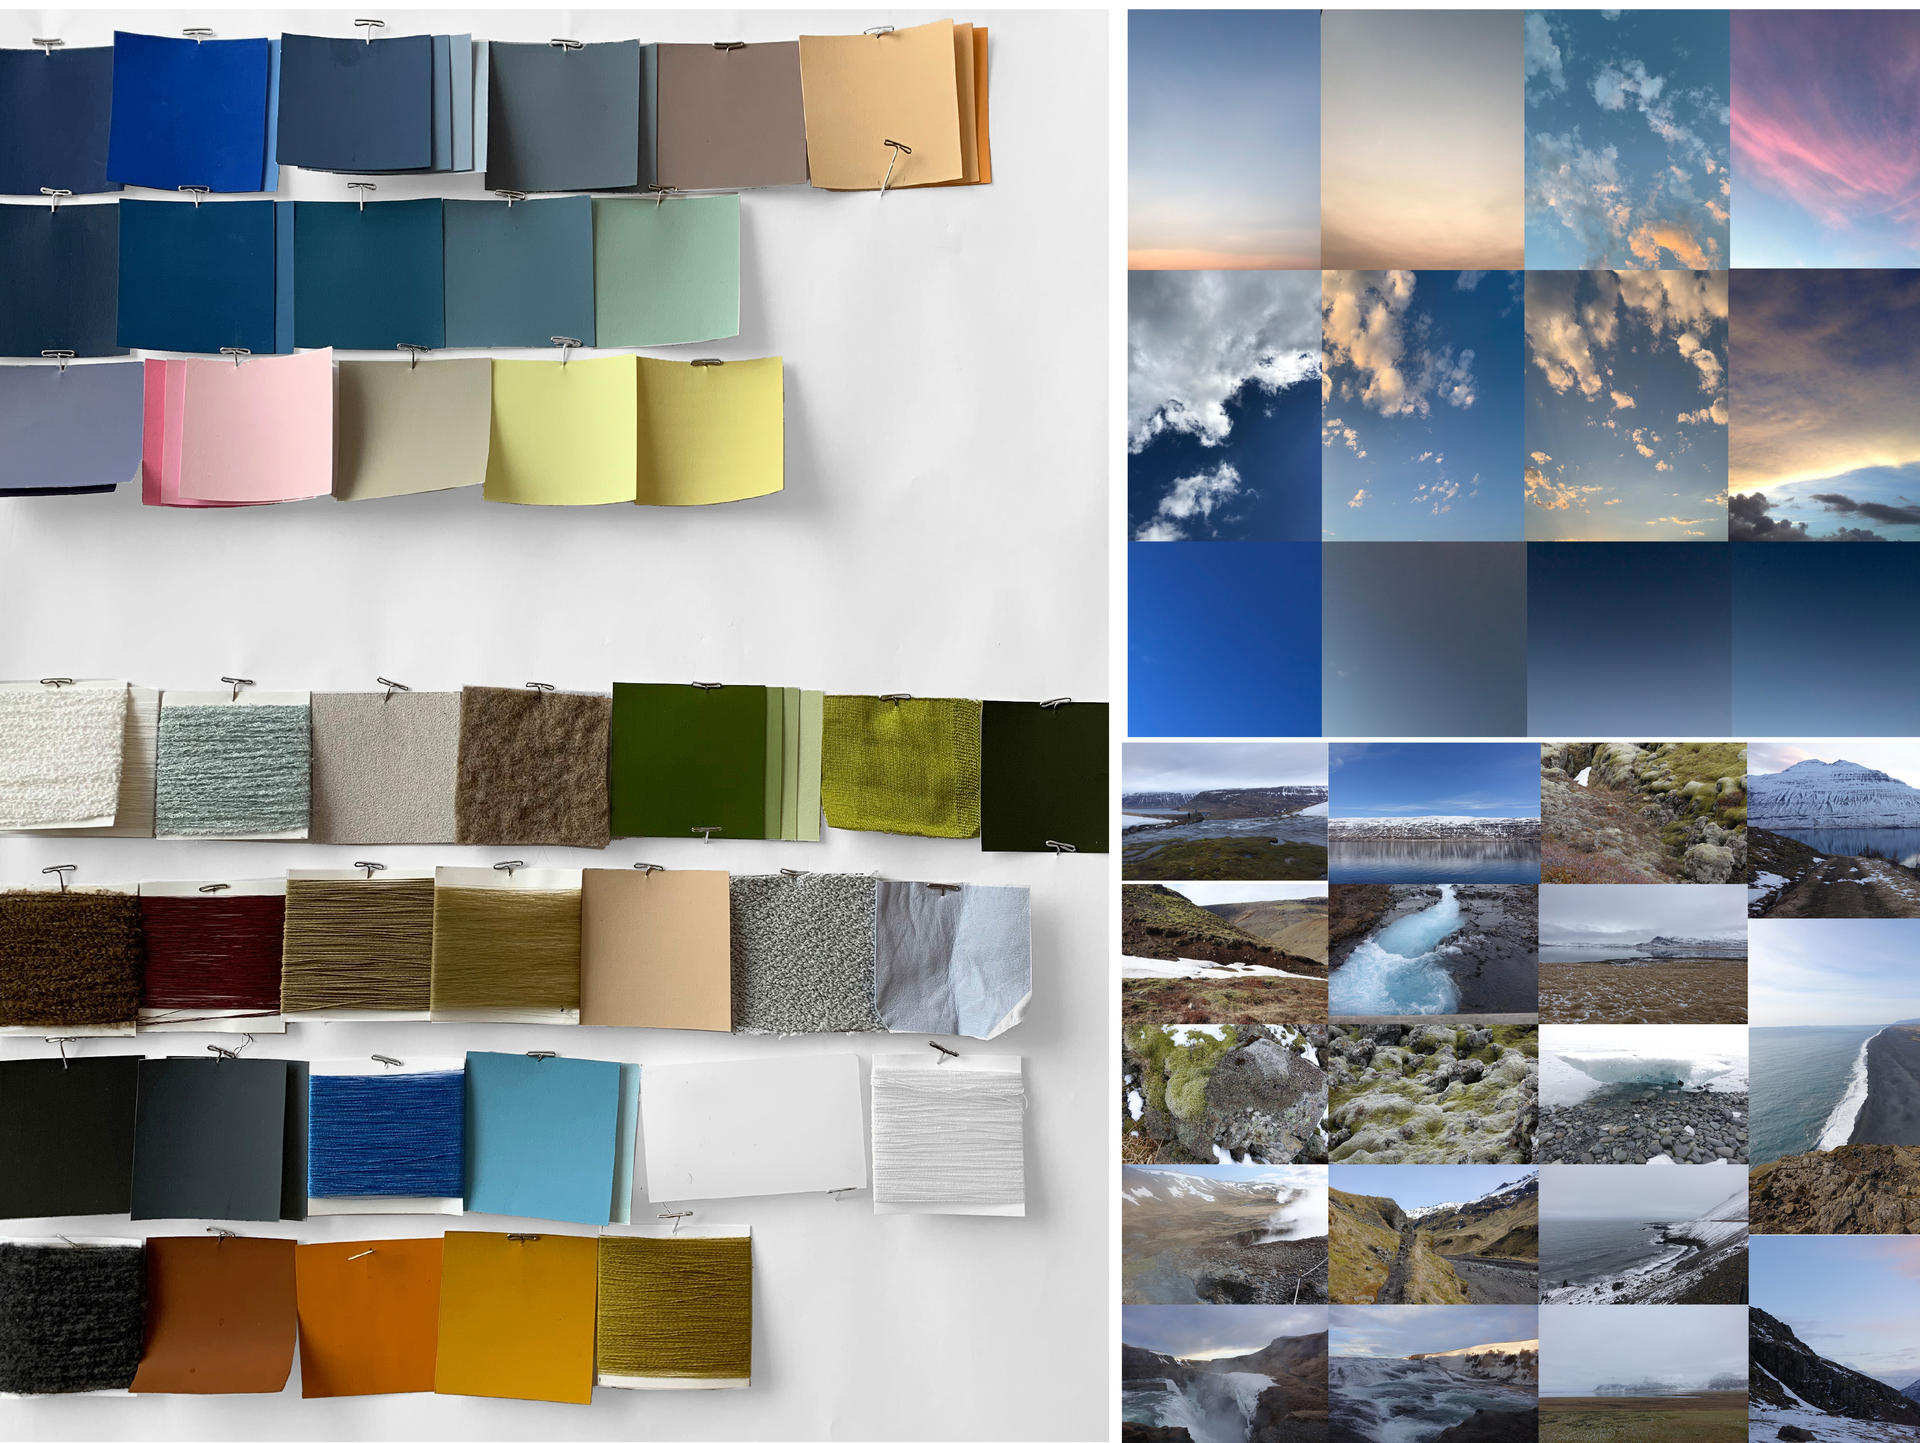 40 hand painted color chips taken from the photos of the sky and landscape of Iceland.